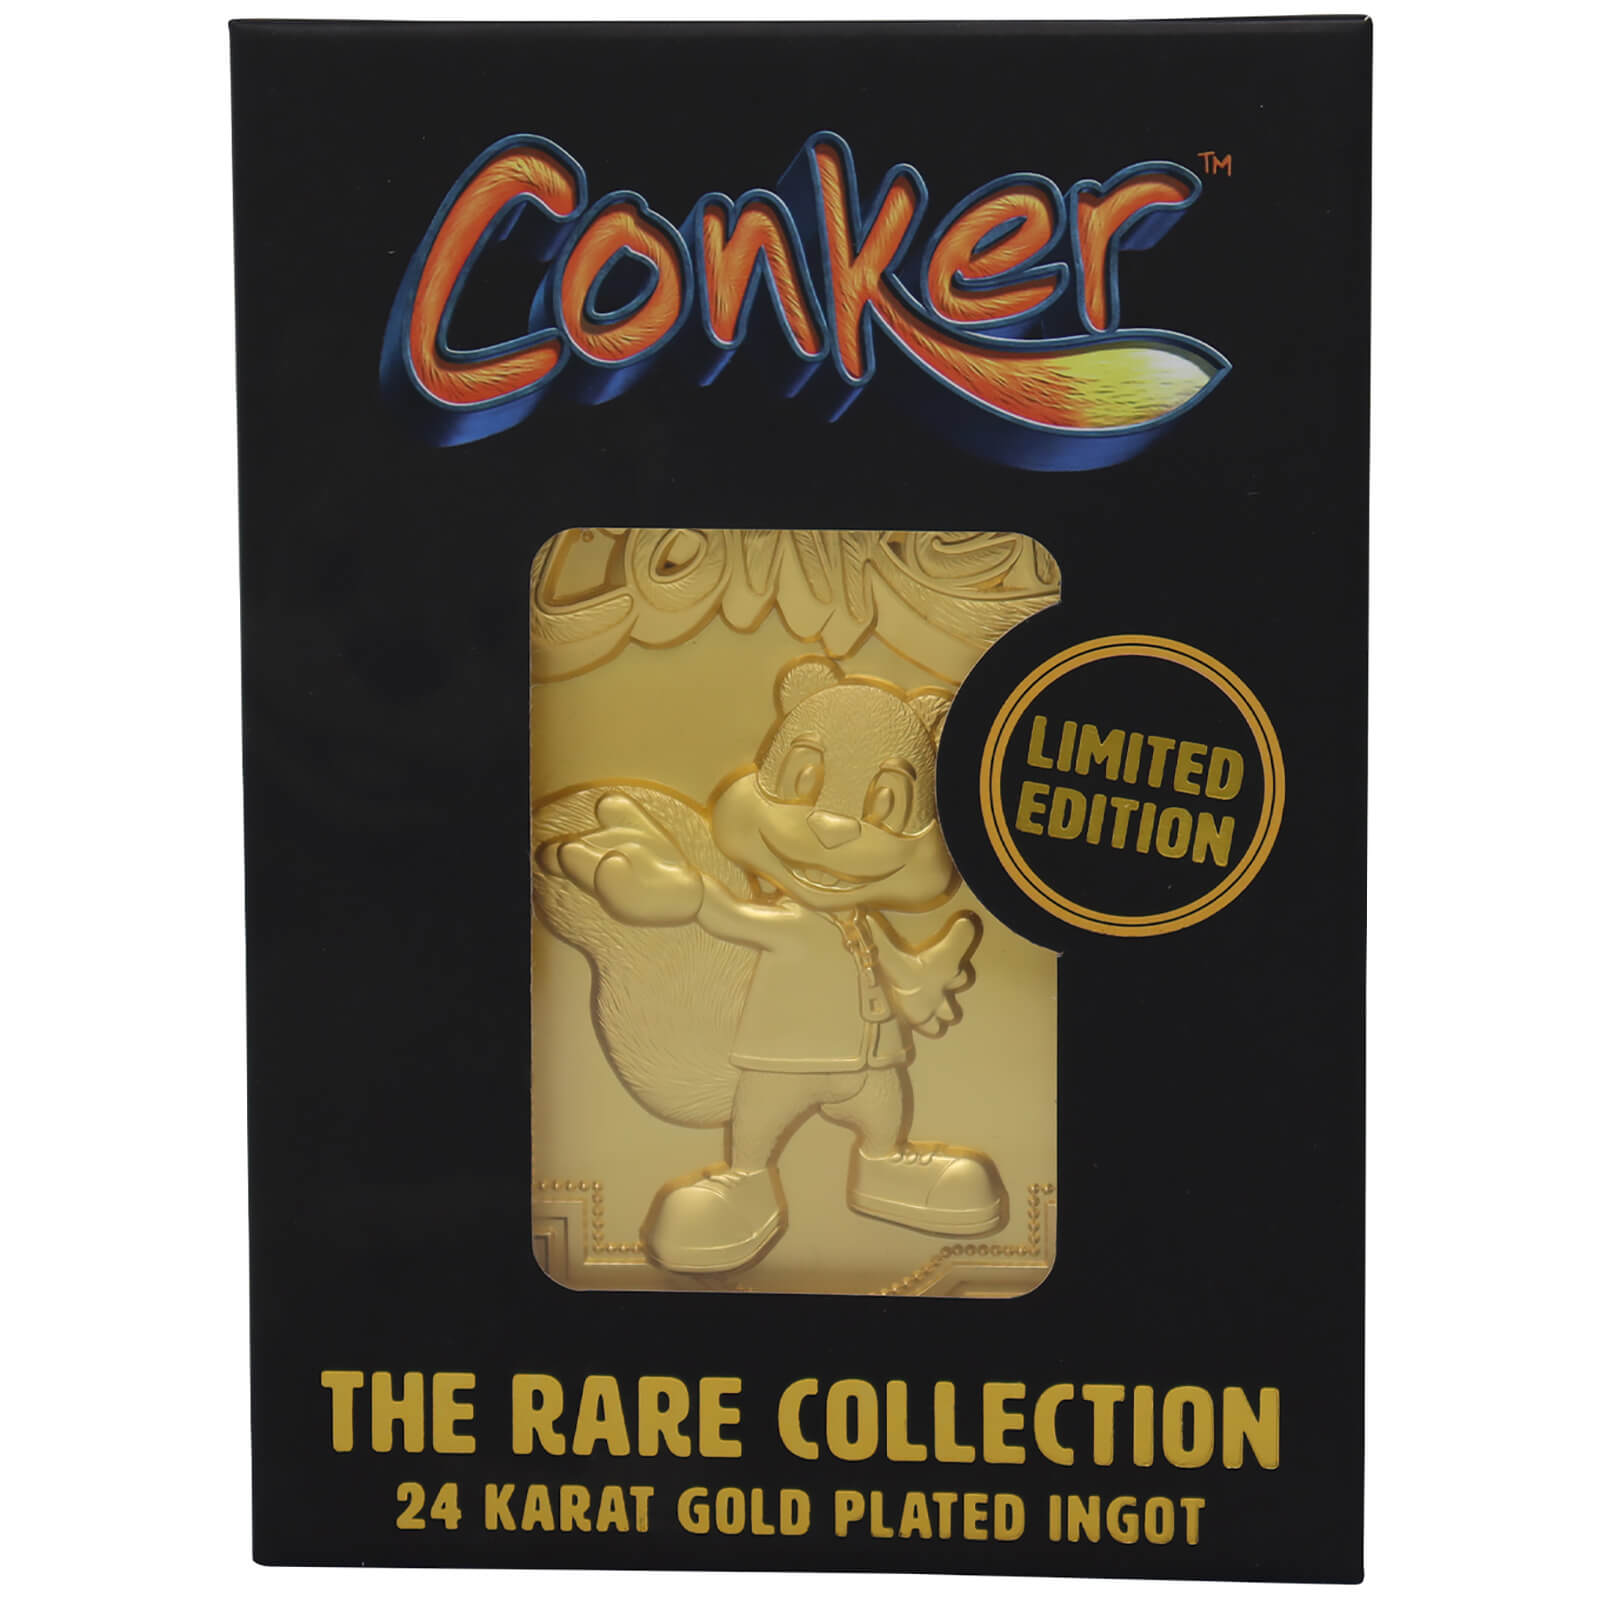 Photos - Other Souvenirs The Rare Collection - Conker 24k Gold Plated Ingot RAR-ING3